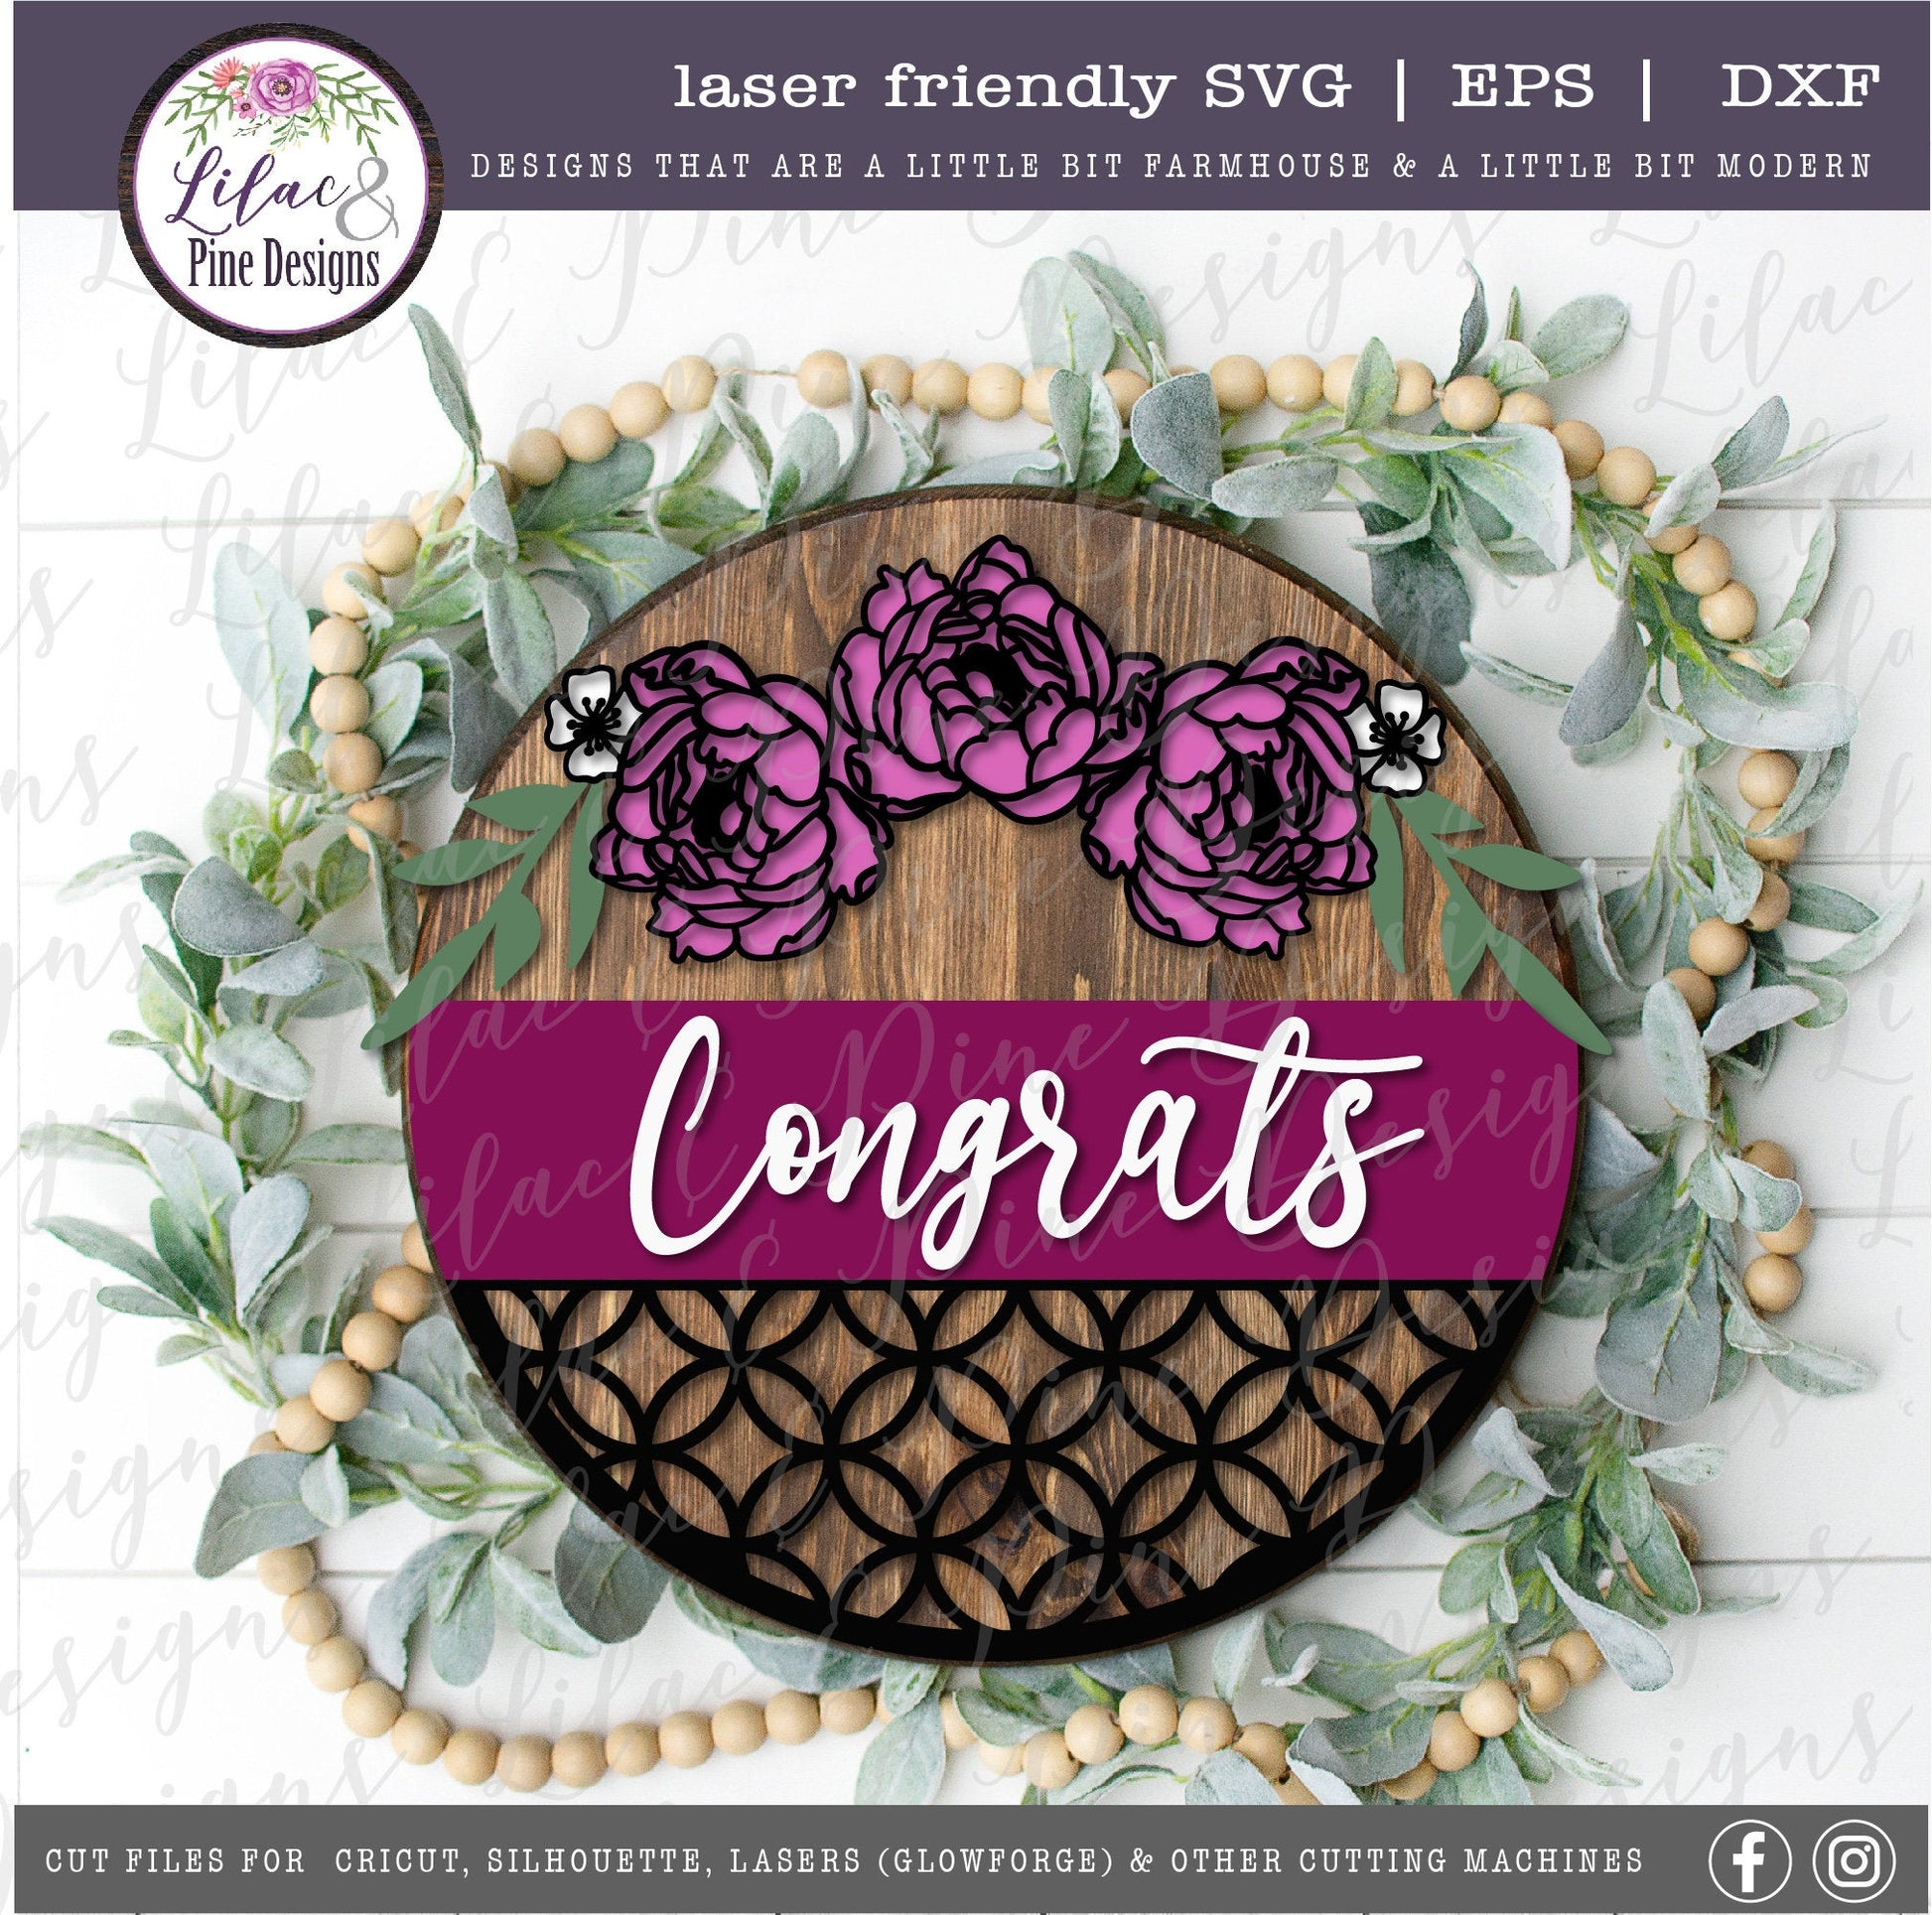 Peony welcome sign, wedding svg, congratulations SVG, Mr and Mrs SVG, round sign, peony SVG, floral Svg, Glowforge Svg, laser cut file